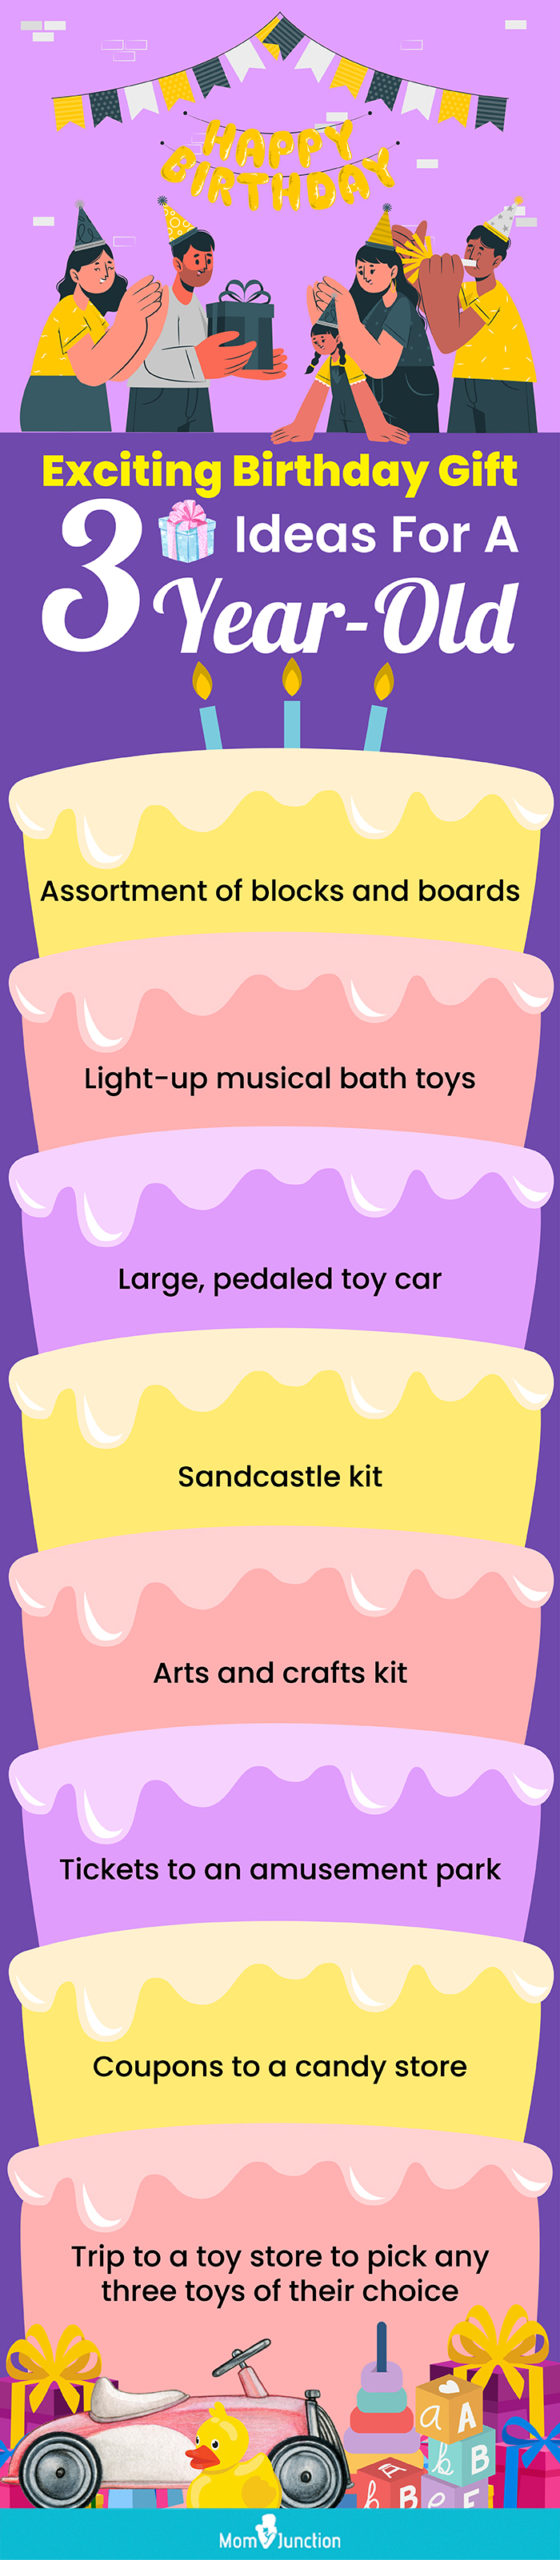 birthday gift ideas for a three-year-old (infographic)